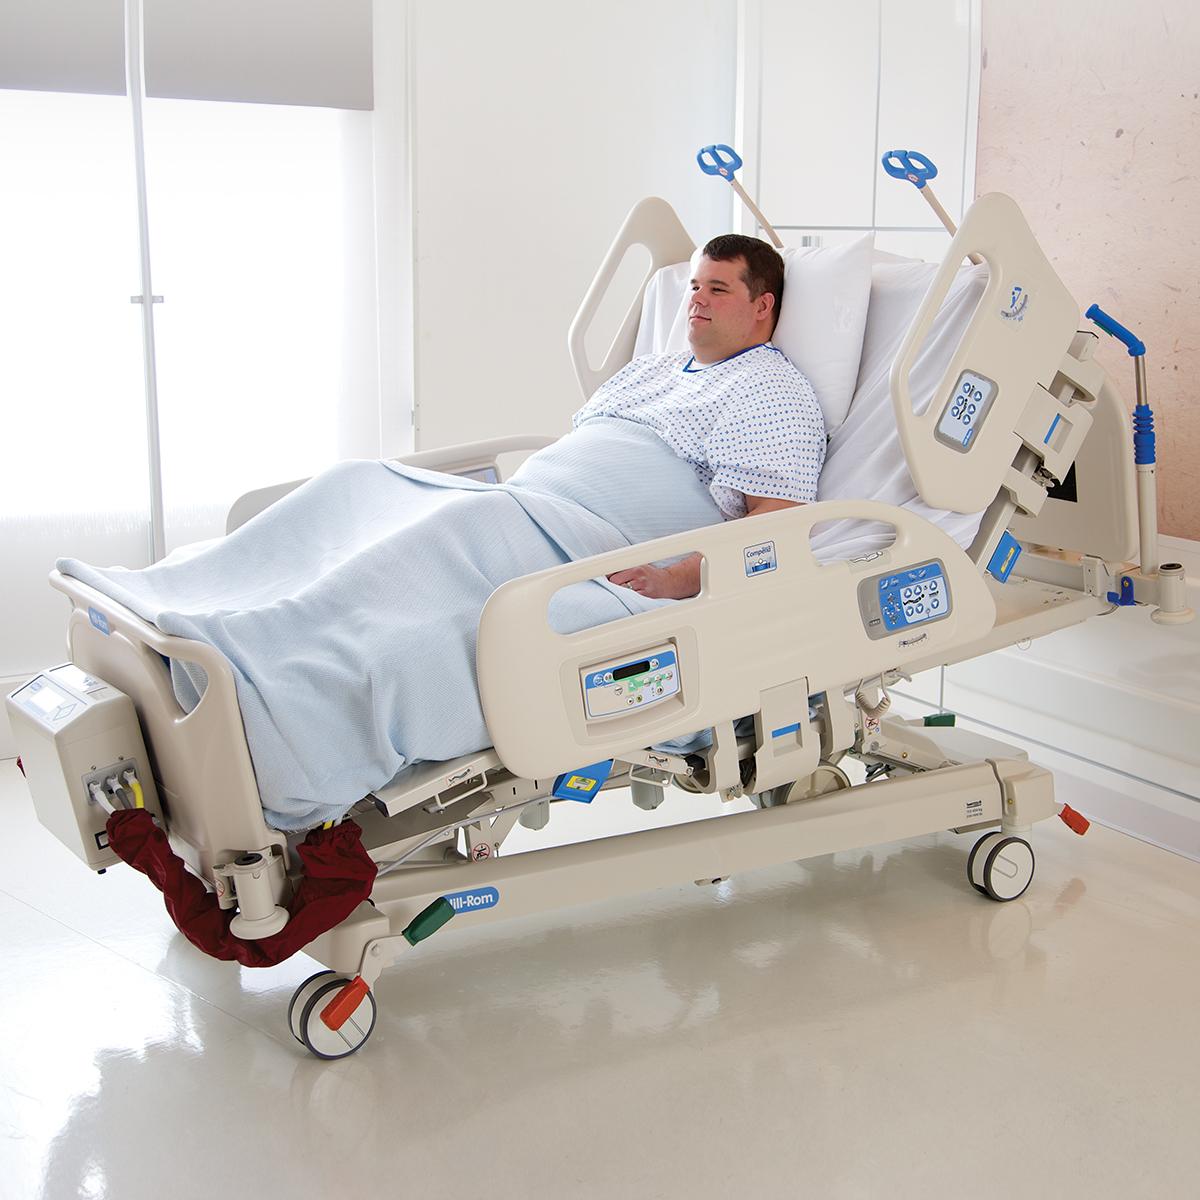 The FlexAFoot feature allows the Compella Bariatric Bed to be quickly lengthened to accommodate taller patients.